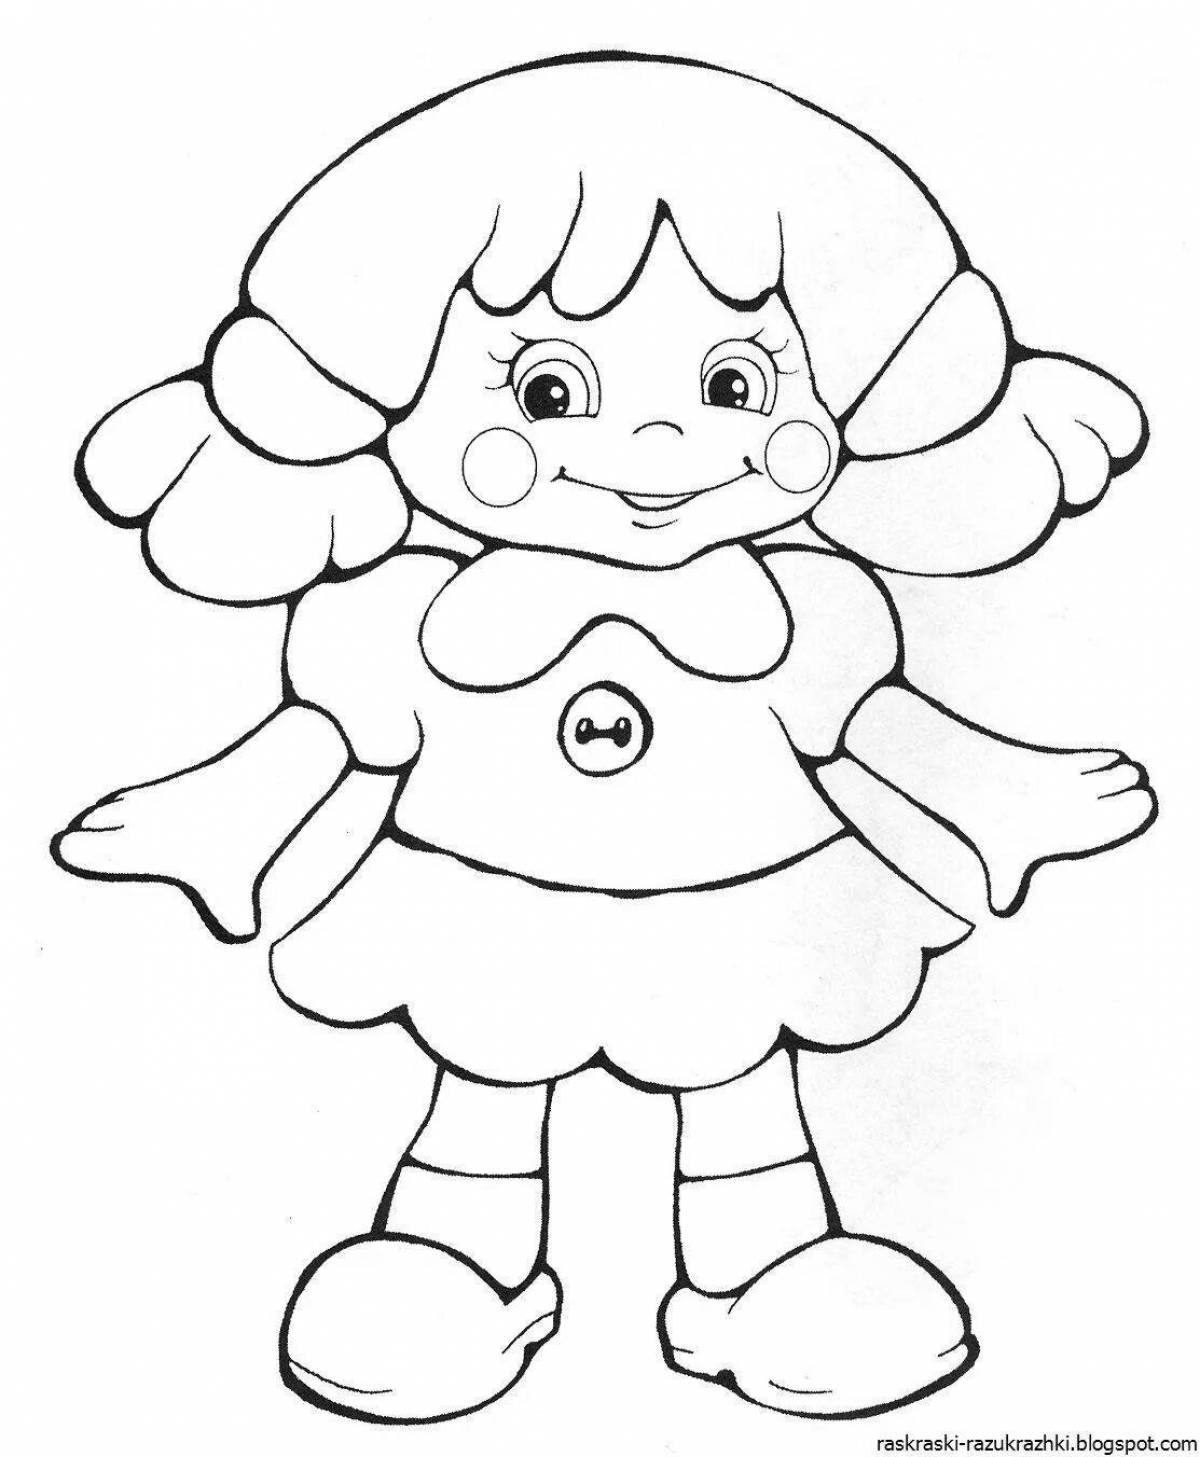 Cute baby doll coloring book